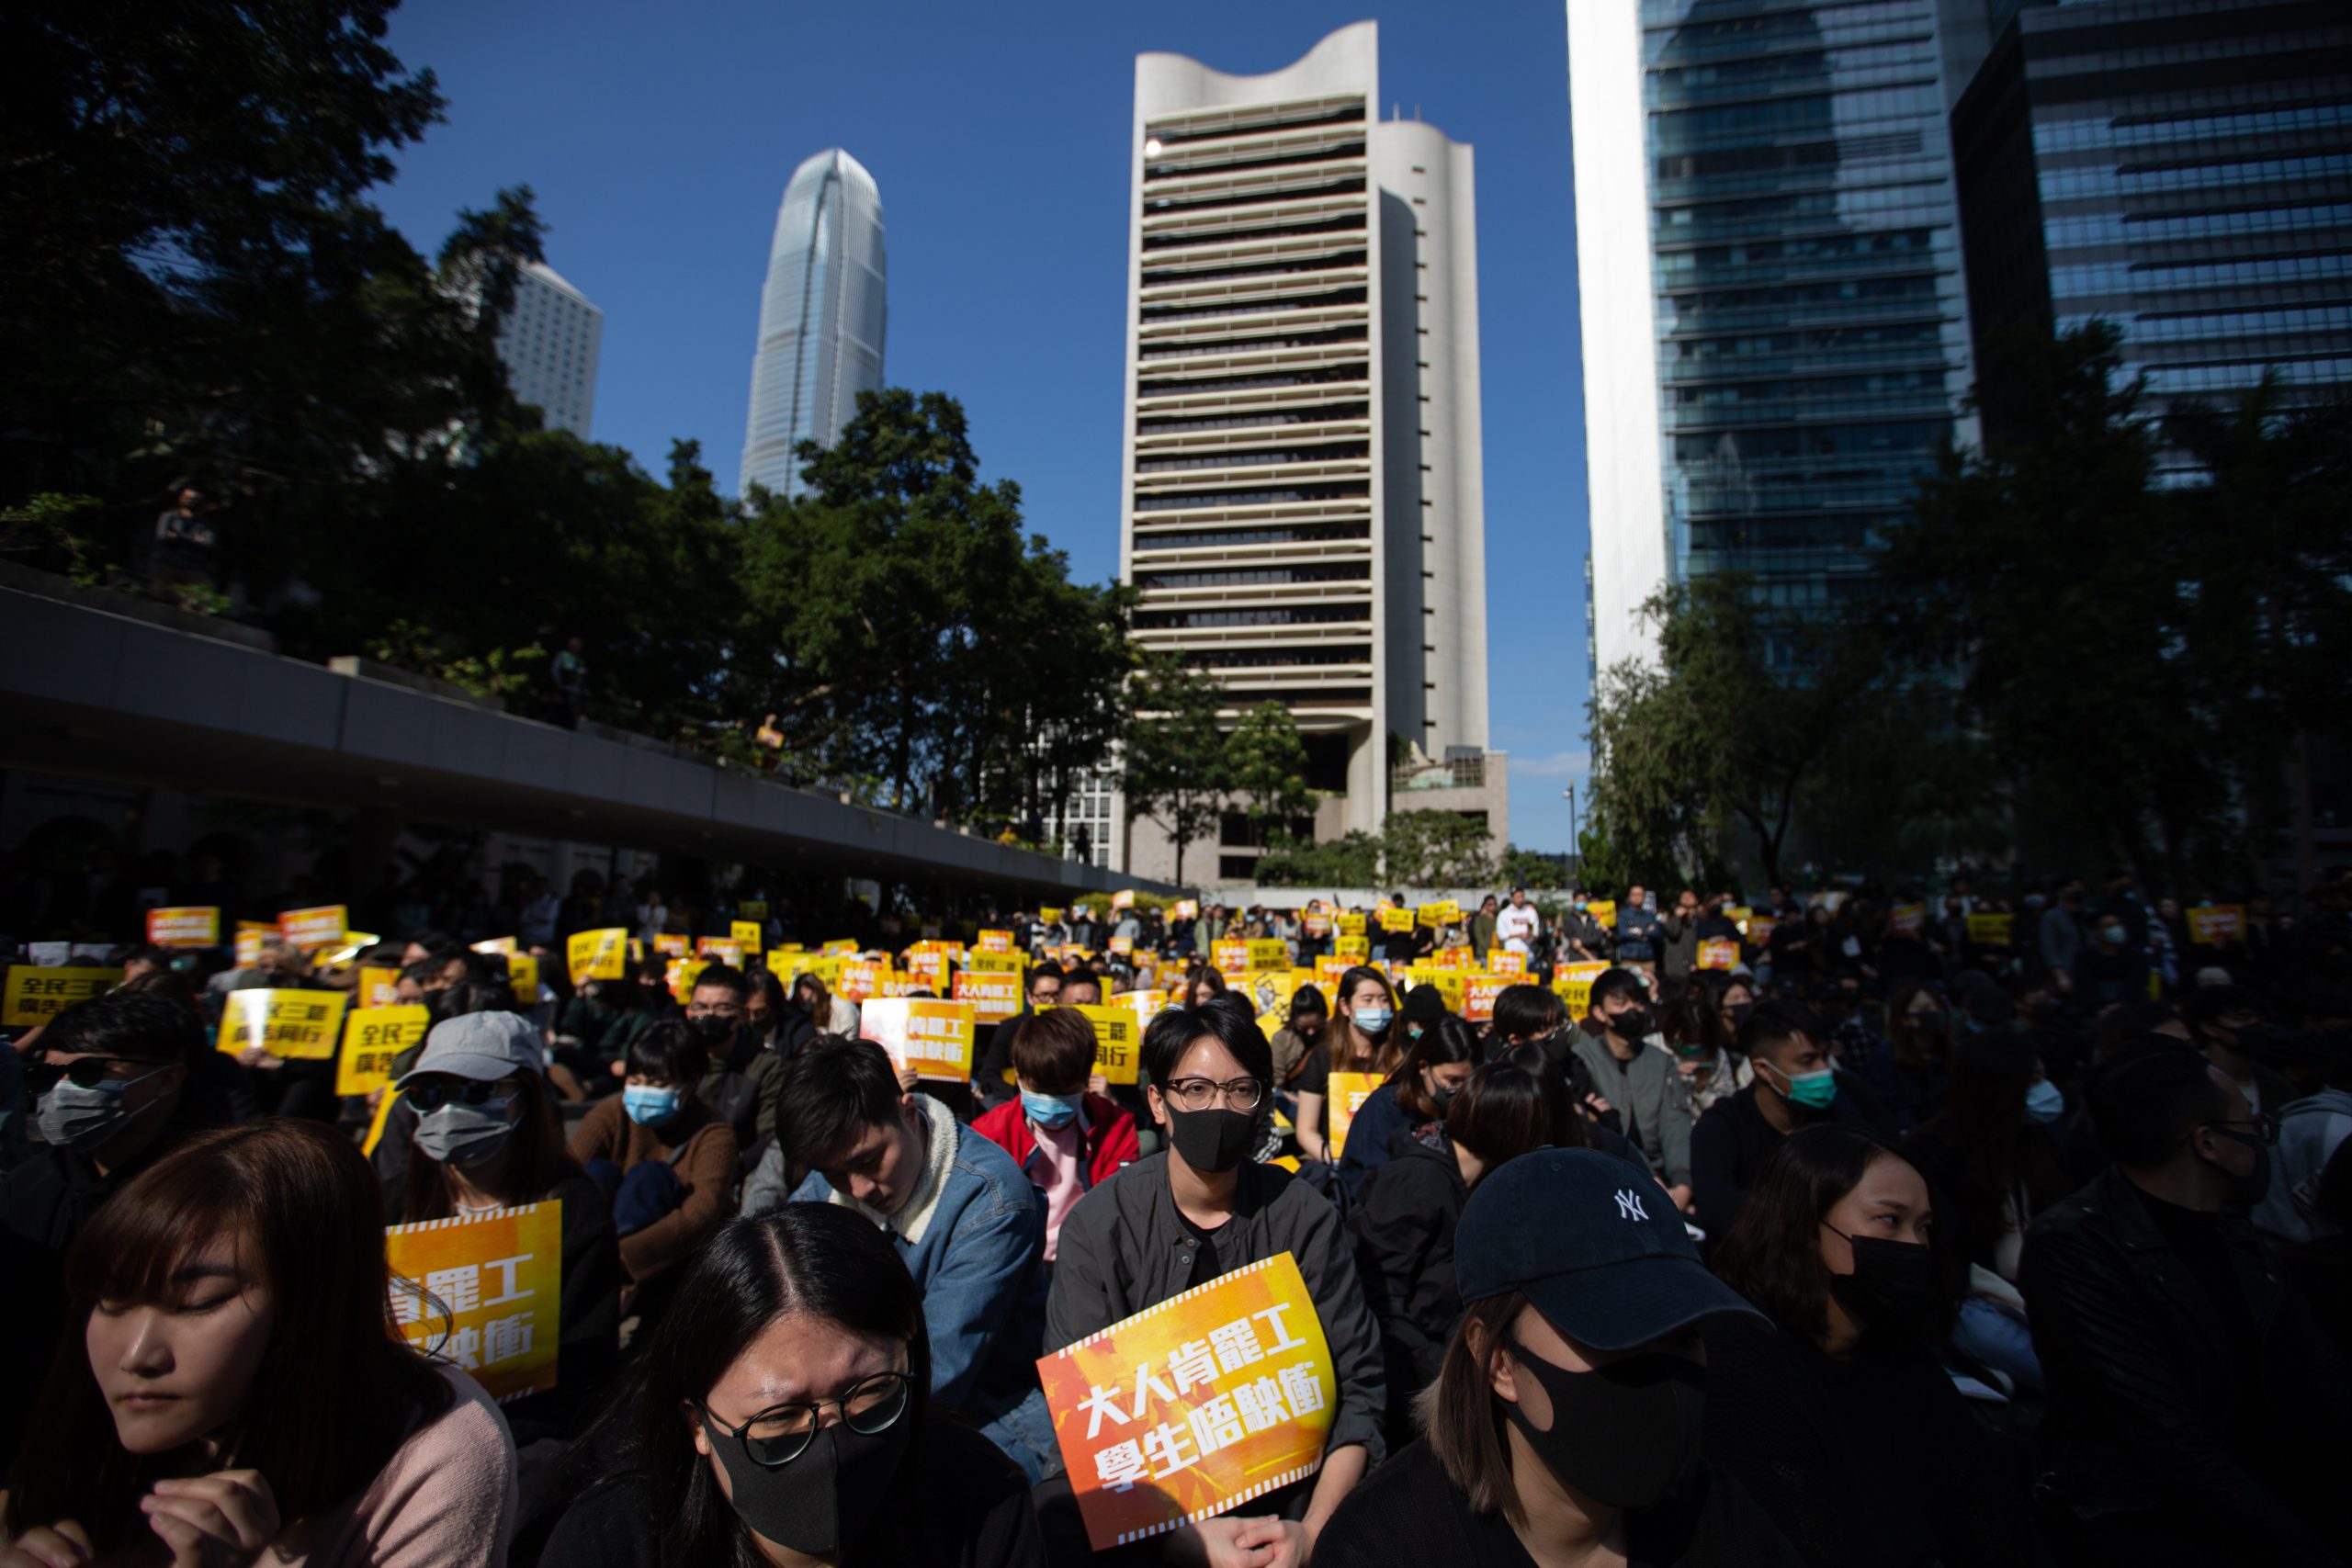 epa08038753 Workers and protesters from the advertising sector attend a rally in Chater Garden, Hong Kong, China, 02 December 2019. The participants began a week-long strike on 02 December in support of the anti-government protests that have been taking place in the city. Hong Kong is in its sixth month of mass protests, which were originally triggered by a now withdrawn extradition bill, and have since turned into a wider pro-democracy movement.  EPA/JEROME FAVRE